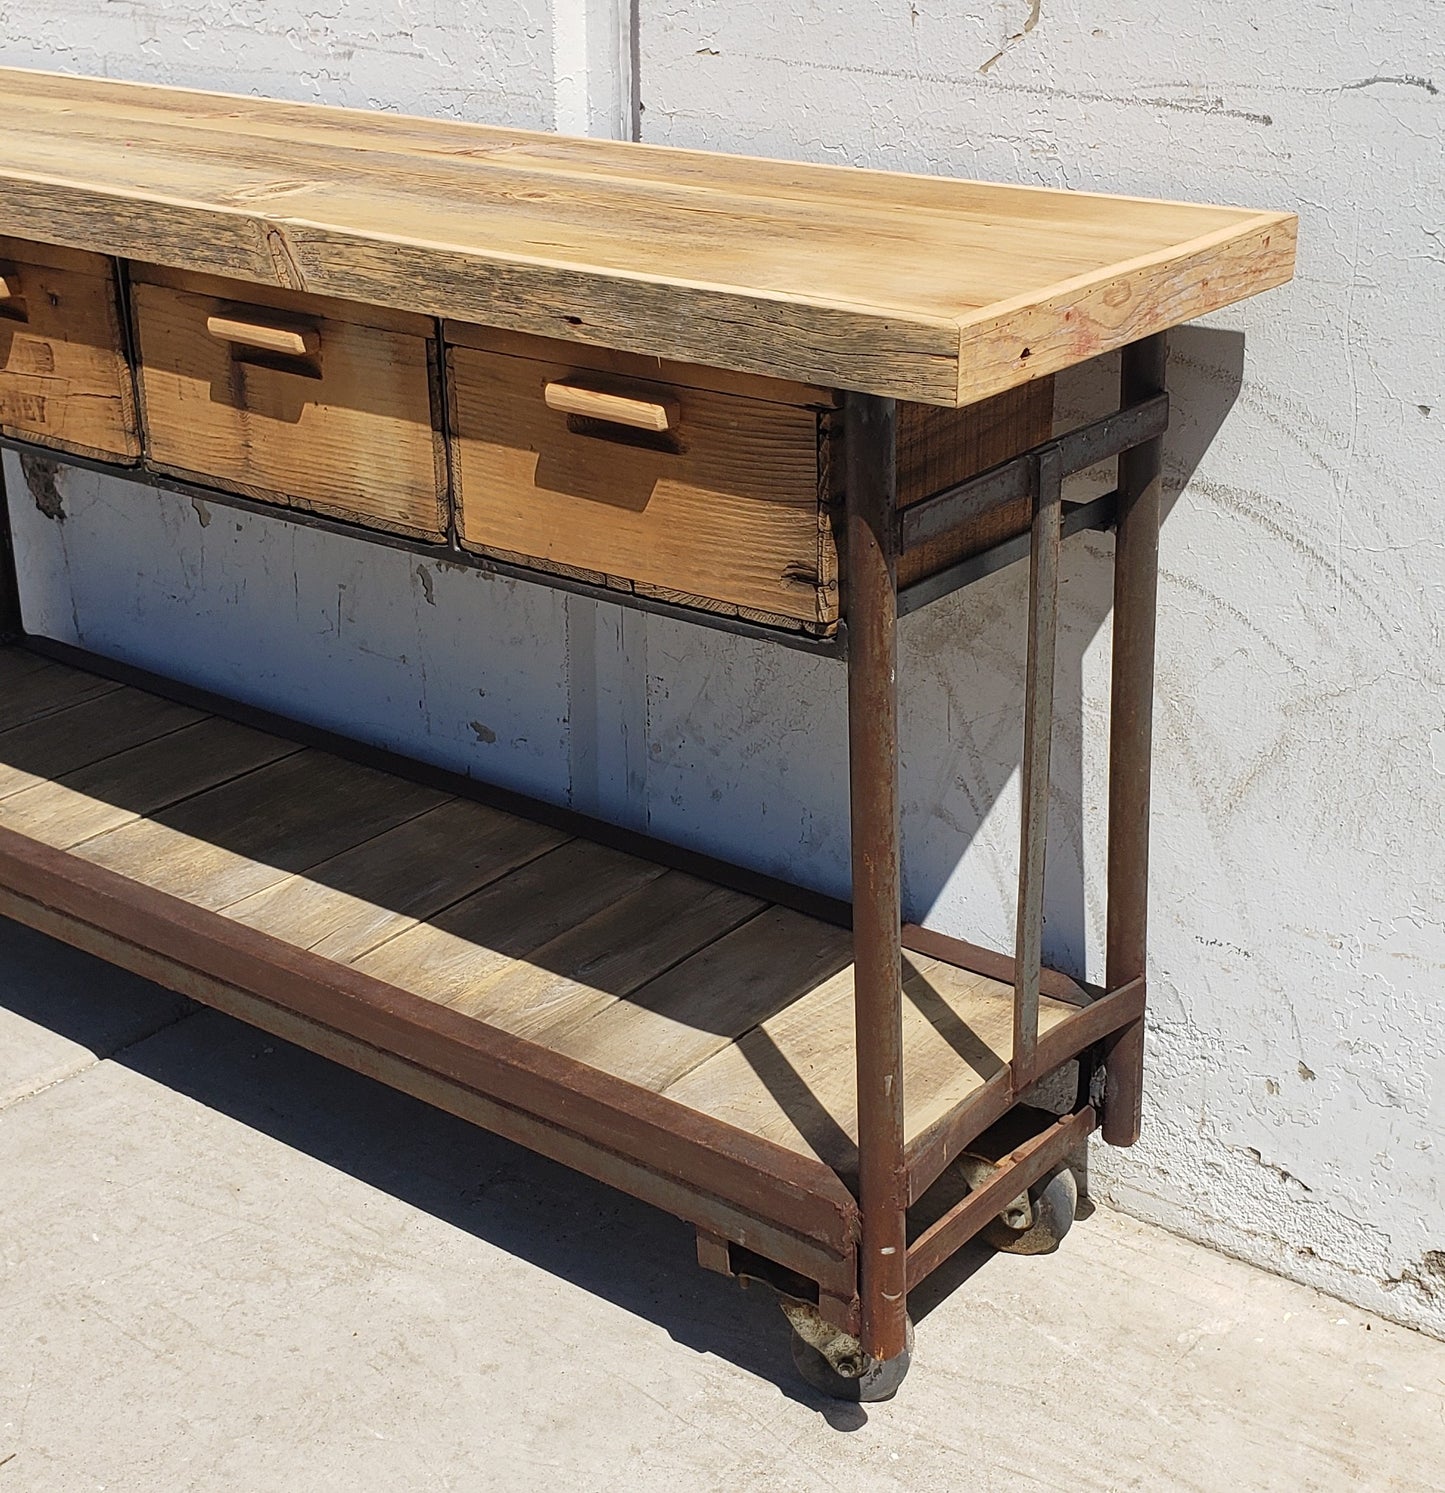 Repurposed Trolley Console Table with Drawers